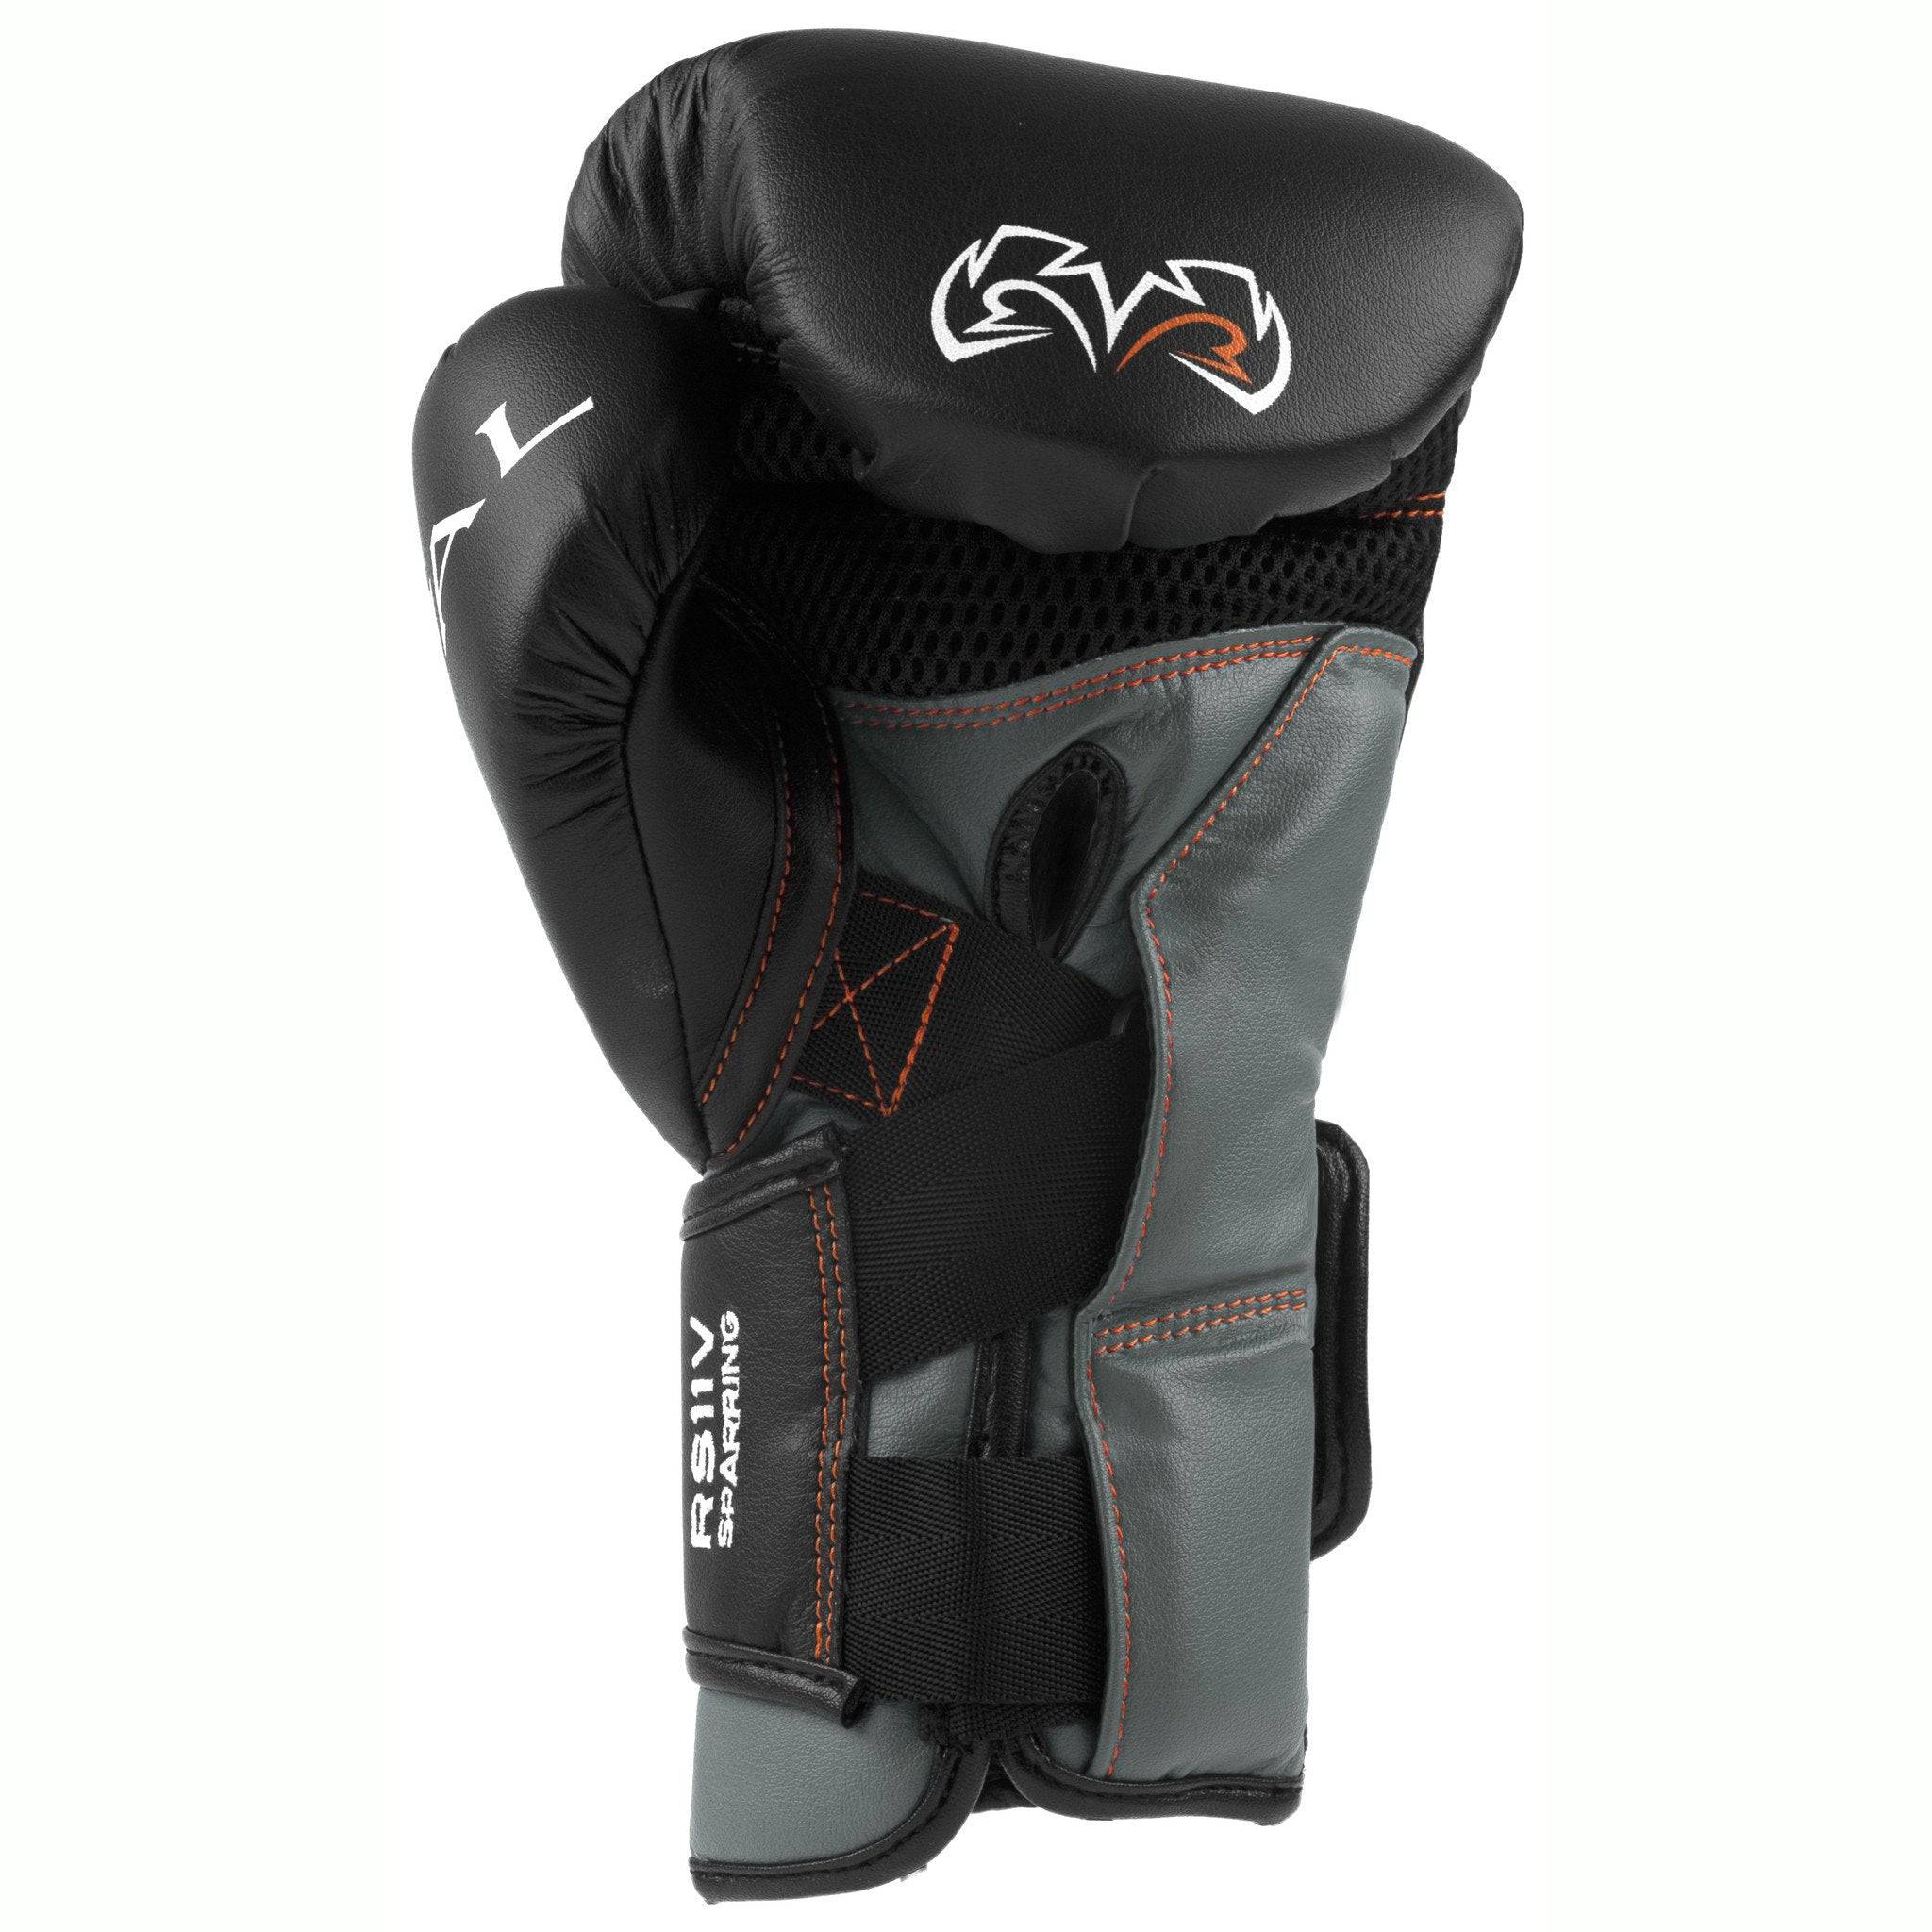 Rival | Sparring Gloves - RS11V-Evolution - XTC Fitness - Exercise Equipment Superstore - Canada - Sparring Gloves